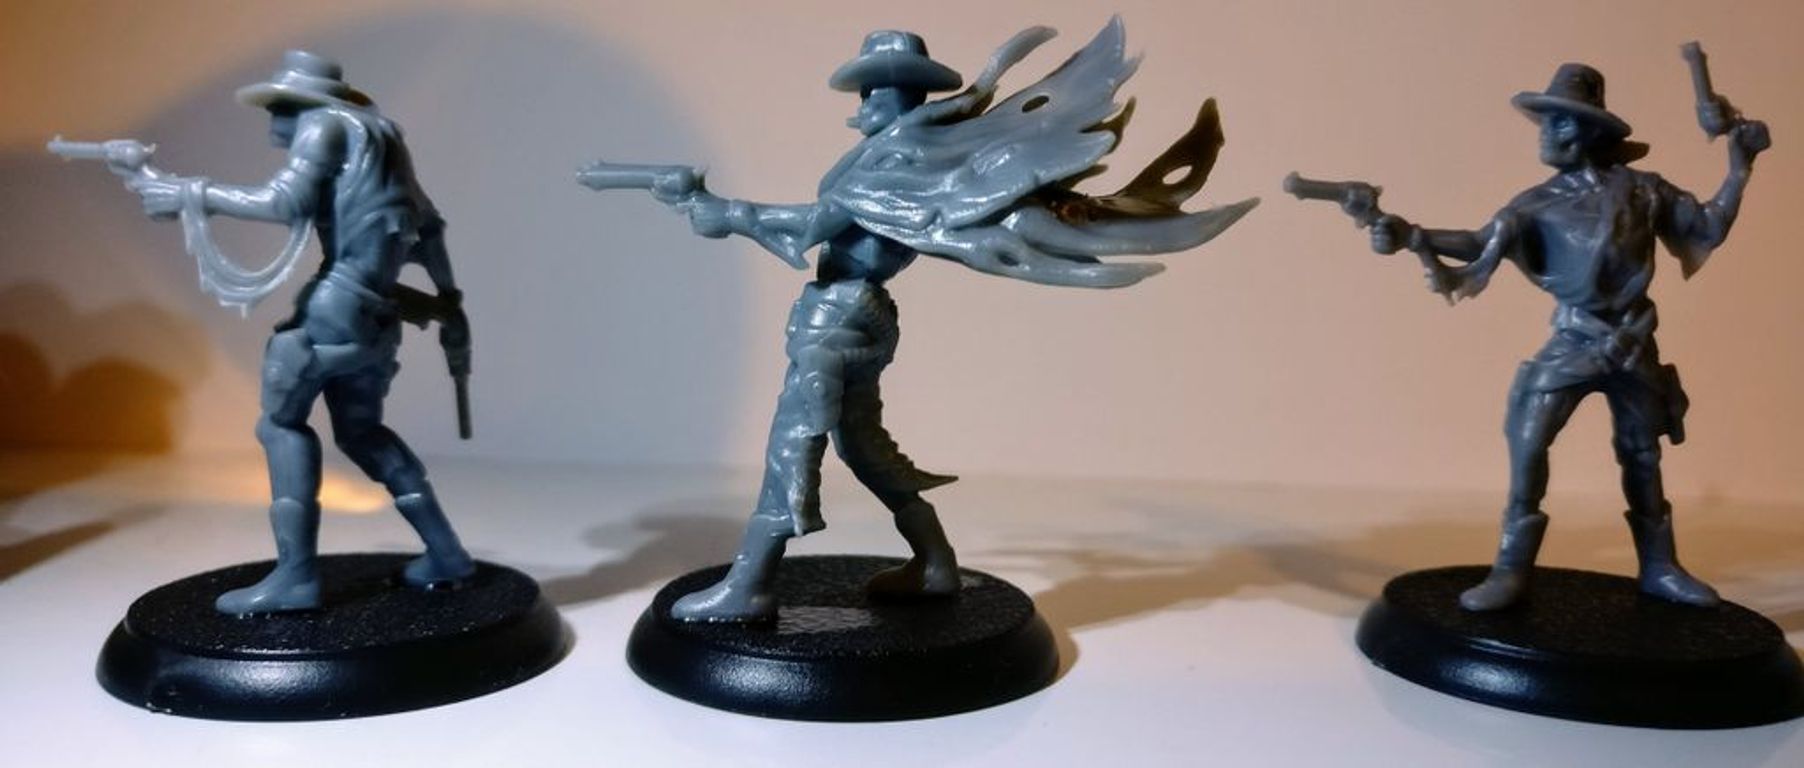 Shadows of Brimstone: Undead Outlaws Deluxe Enemy Pack miniaturen